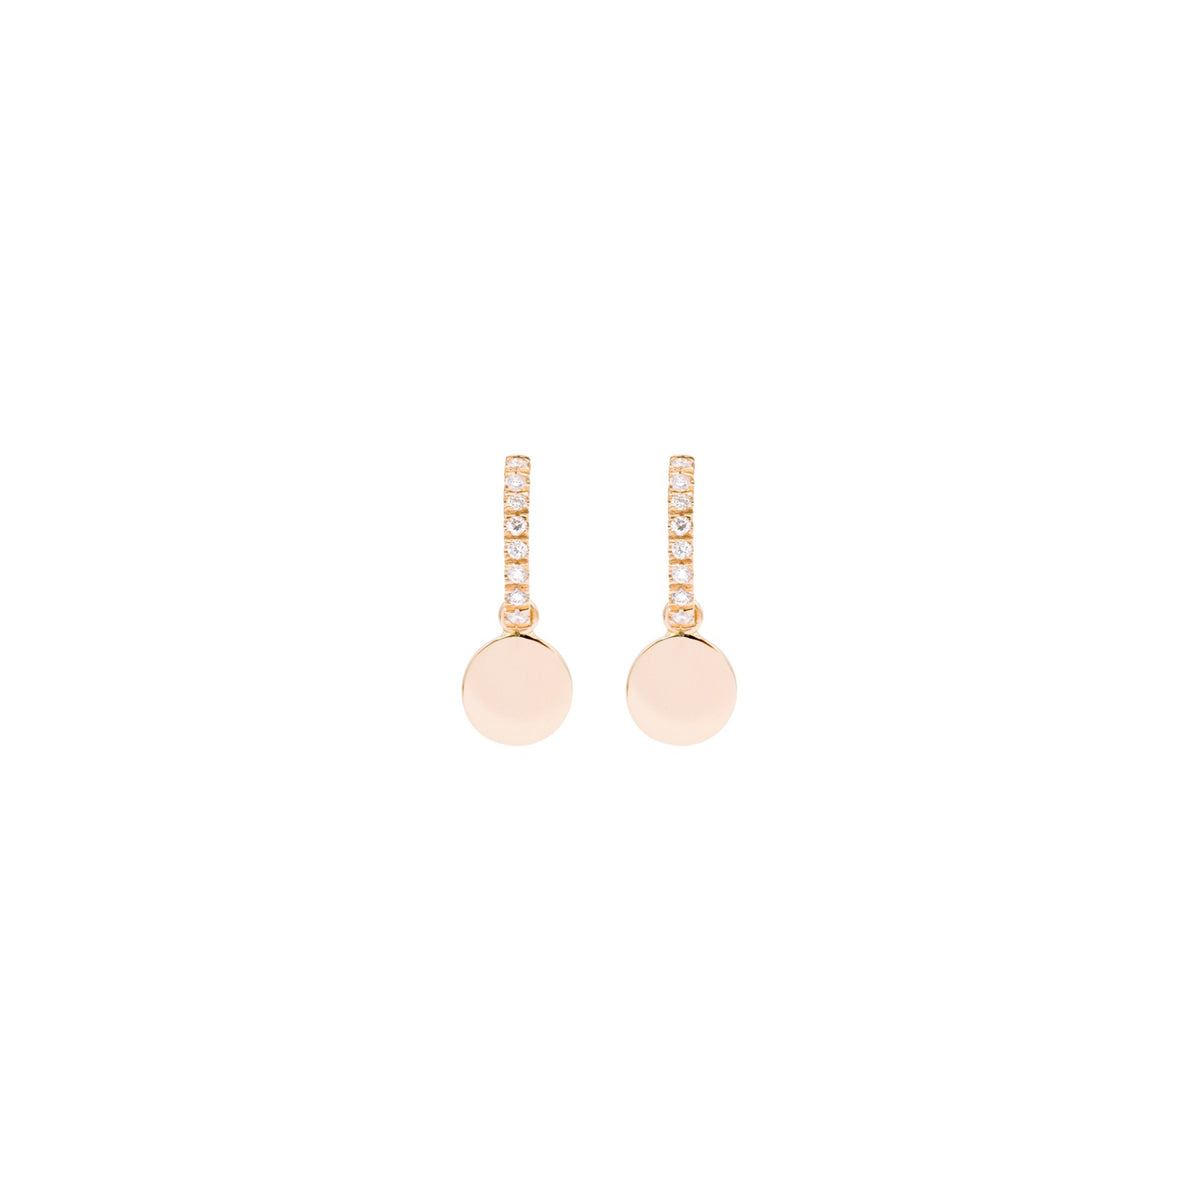 round gold and diamond earrings